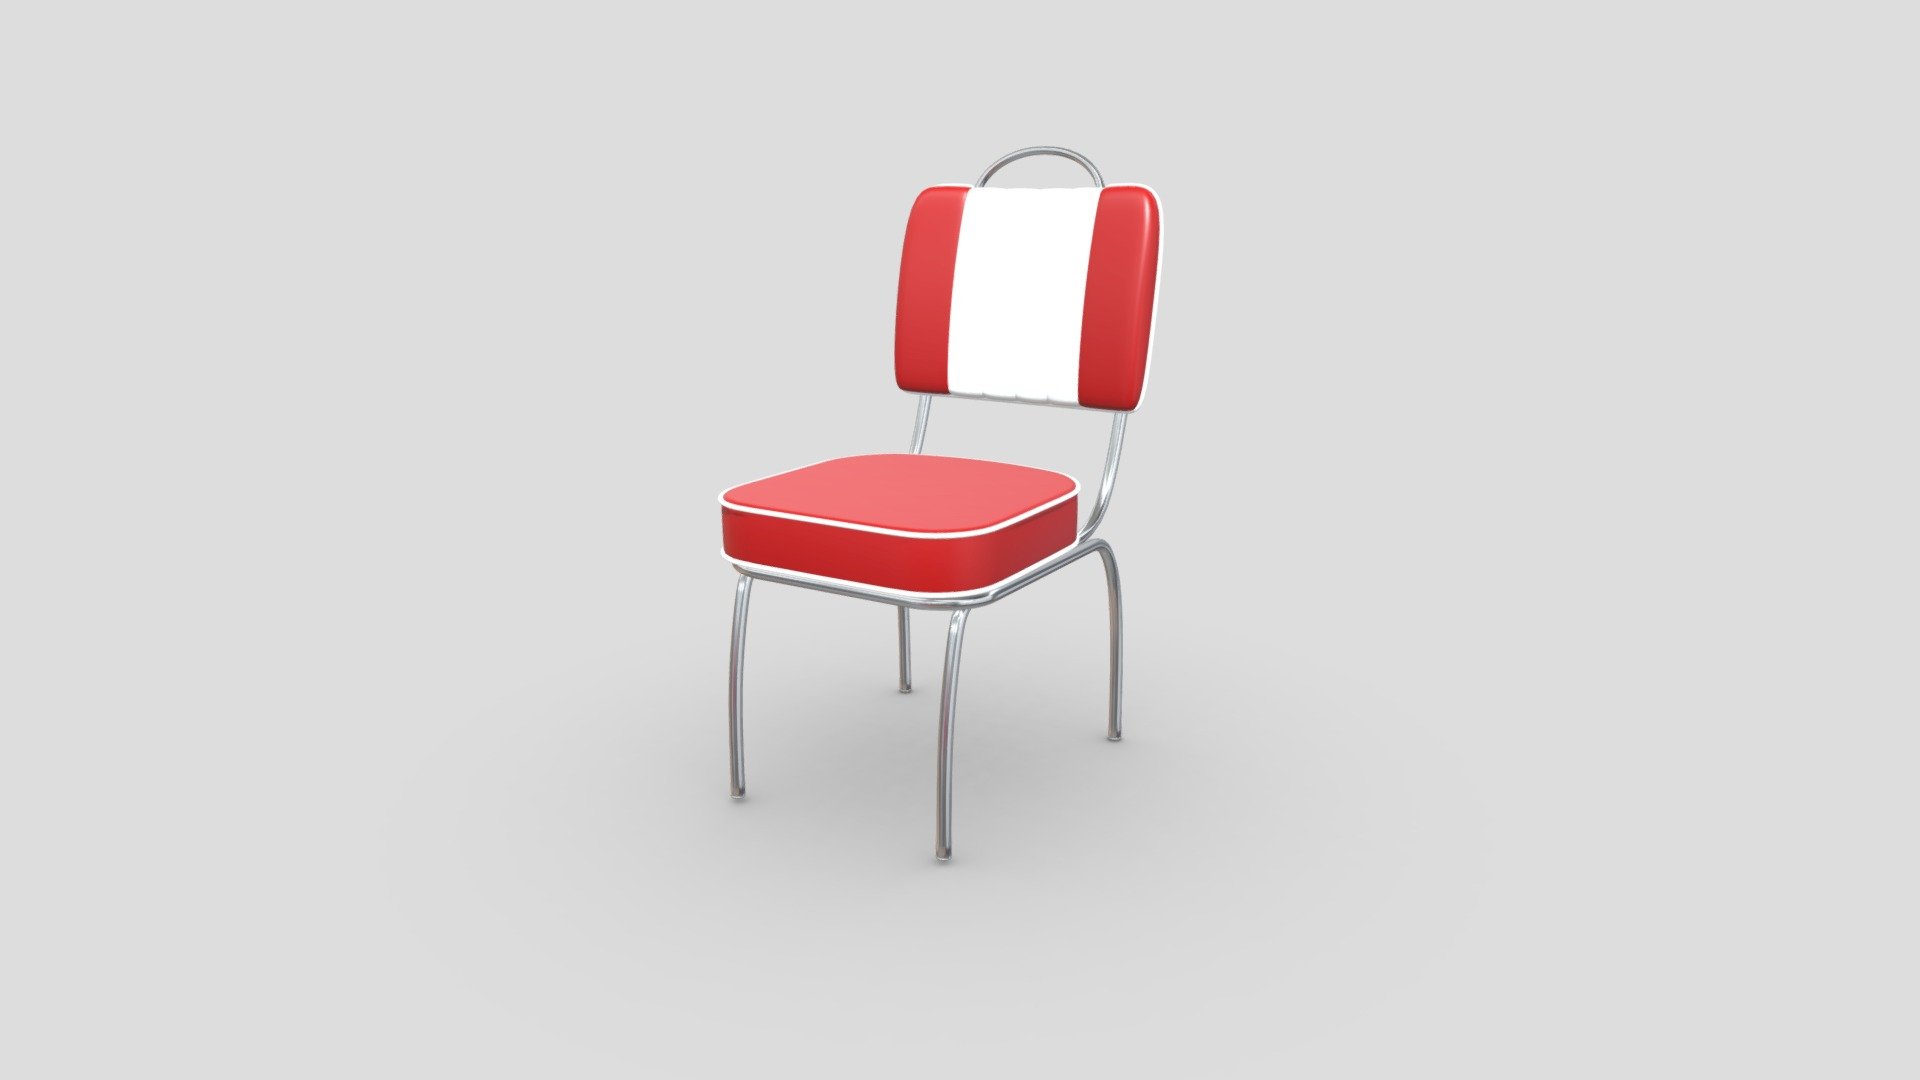 Retro chair 3D model that I made using Blender. This model uses plastic materials for the seat, a grooved backrest with a white stripe in the center, and white lining around the edges. It also has metal legs and seat supports as well as a metal handle connected to the backrest. This model uses PBR textures that have been baked into one PBR material.

Features:




Includes 1 retro chair 3D model

Made using 2K PBR textures in PNG format and uses the metalness workflow

Model has been manually UV unwrapped

Blend file has pre-applied materials/textures with camera and lighting setups 

Model exported in FBX, OBJ, GLTF/GLB, DAE/Collada file formats 

Includes GLTF file type instructions and help document 

Includes rendered images, wireframes, and extras

Included Textures:




AO, Diffuse, Roughness, Gloss, Metallic

UVLayout

The source file is uploaded in FBX format and is used for demonstration. In the additional file you will find all model exports and the textures that go along with them 3d model